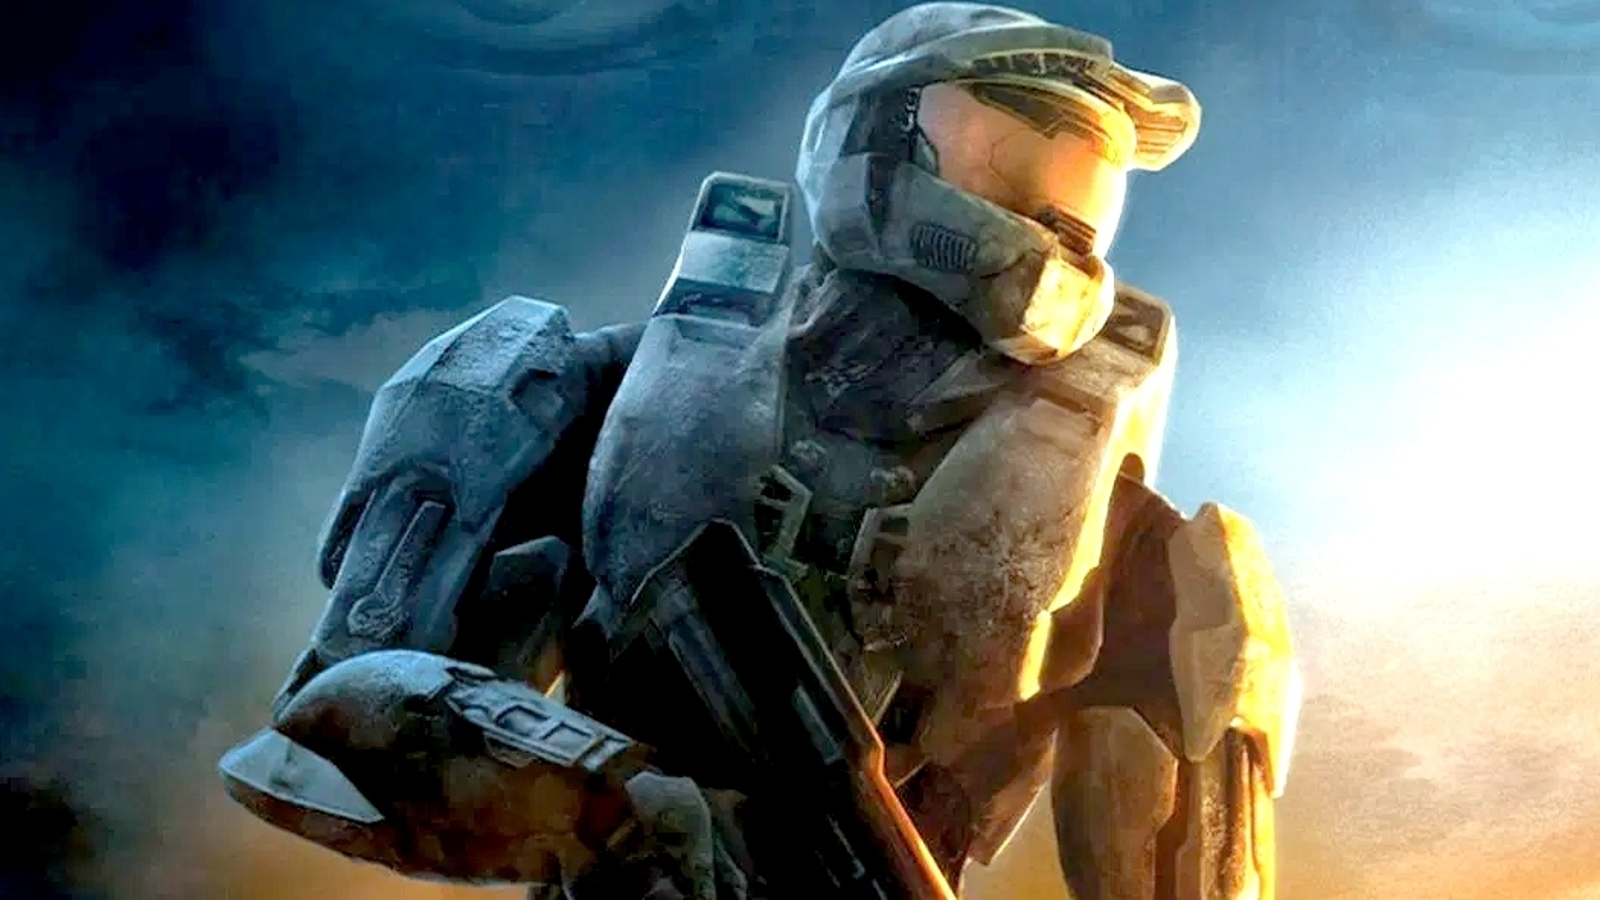 Halo Reach Full Game Walkthrough - No Commentary (PC 4K 60FPS) HALO Master  Chief Collection 